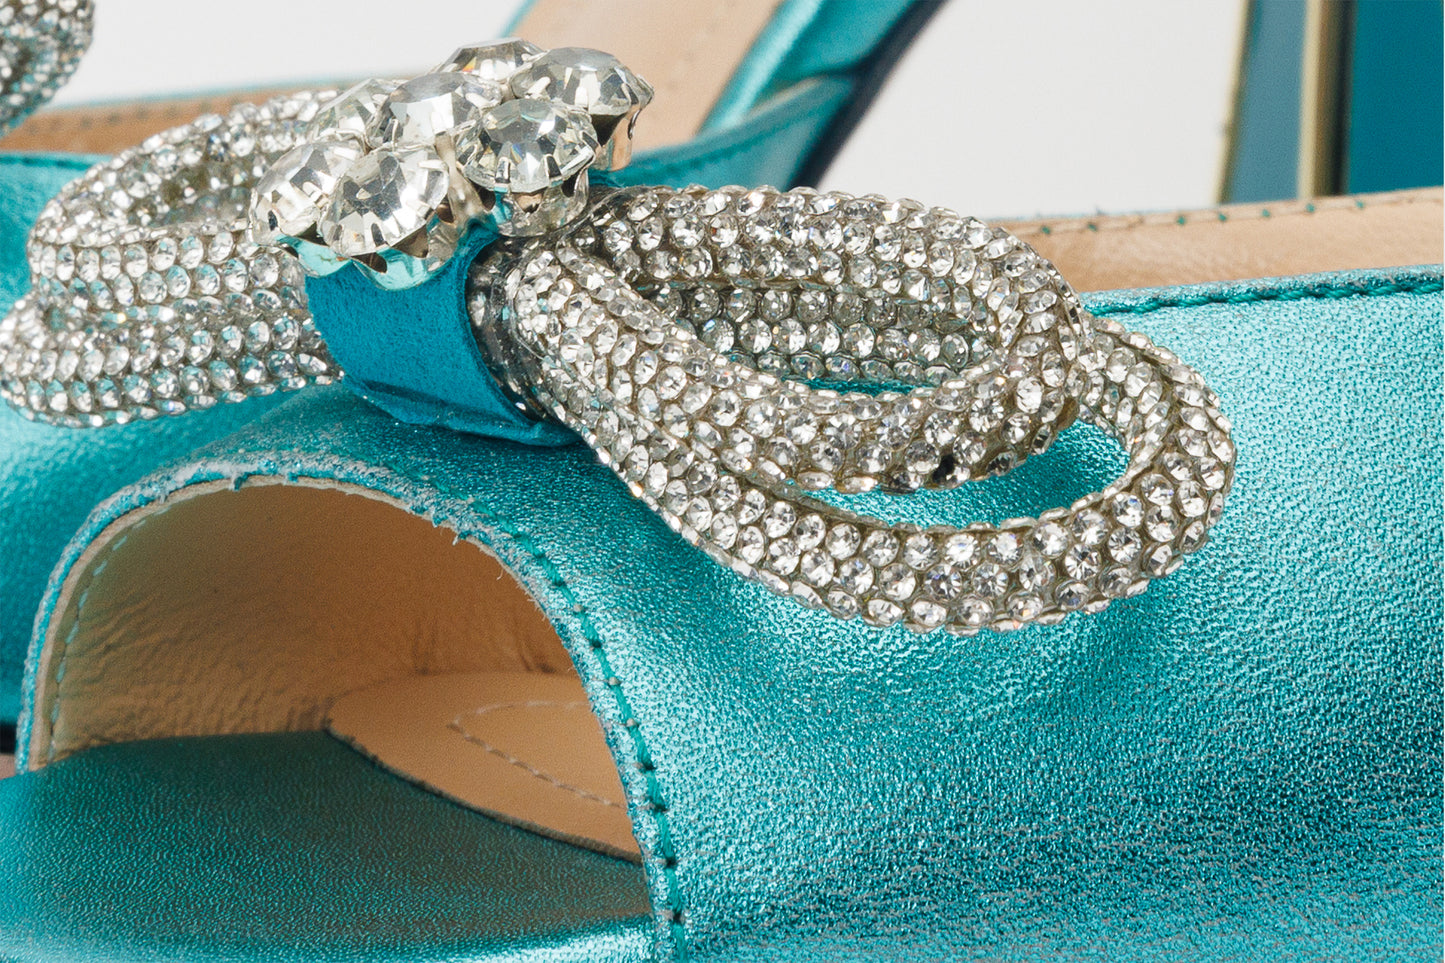 The Jiffy Turquoise Leather Women Sandal